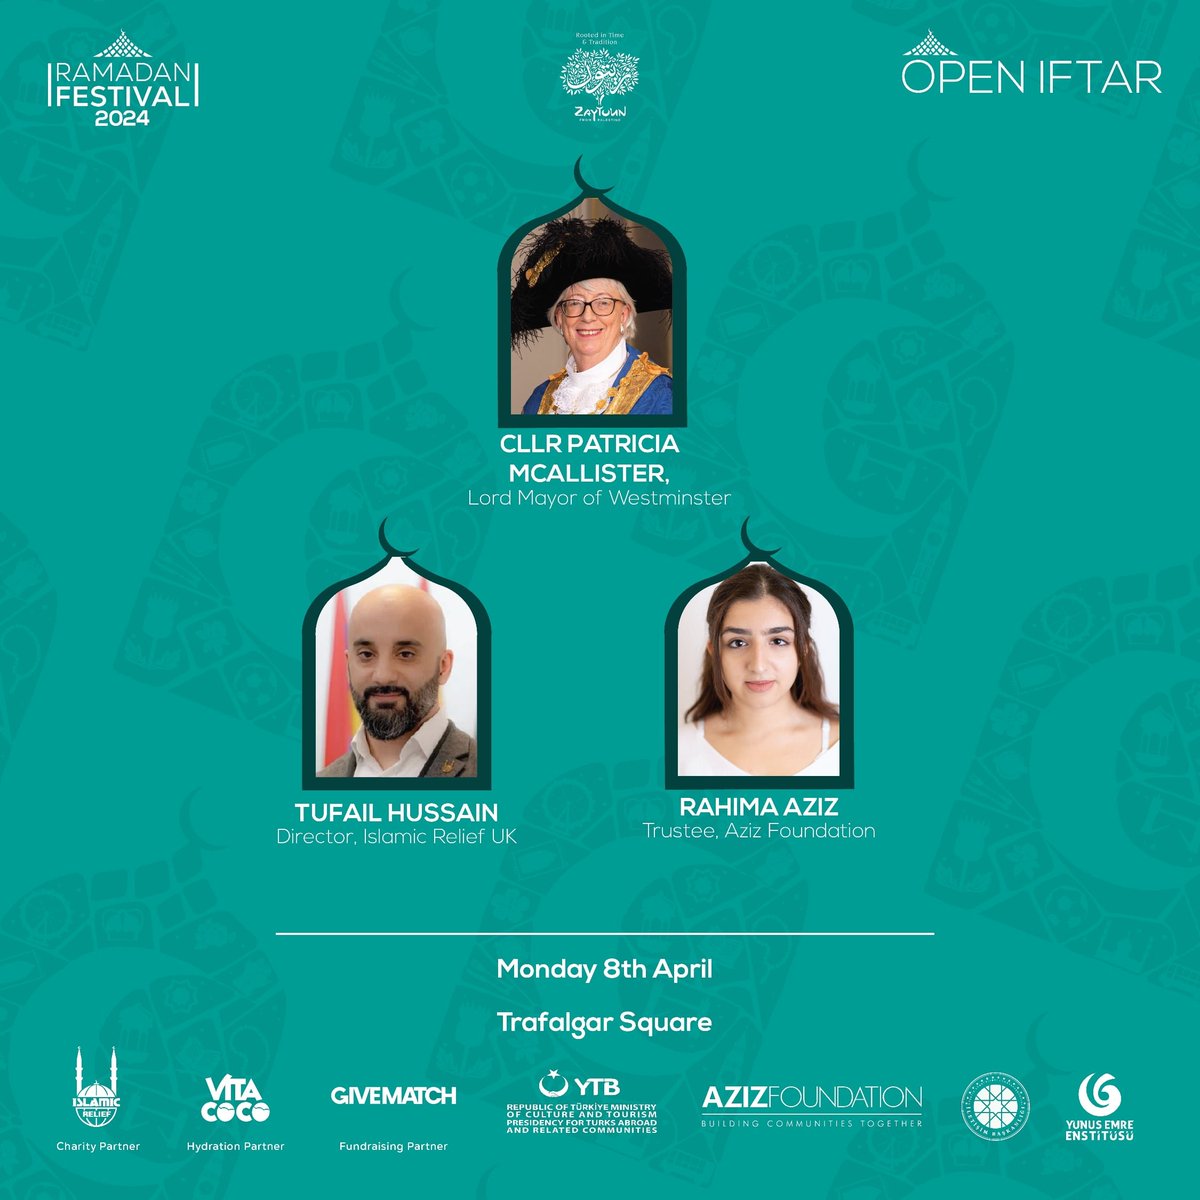 Today, we gather for the grand finale of #Ramadan2024. We will be hosting over 3000 attendees at Europe’s largest public #OpenIftar in the heart of London. Our esteemed speakers, Cllr Patricia Mcallister, Rahima Aziz, And Tufail Hussain will be joining us today. #RamadanFestival